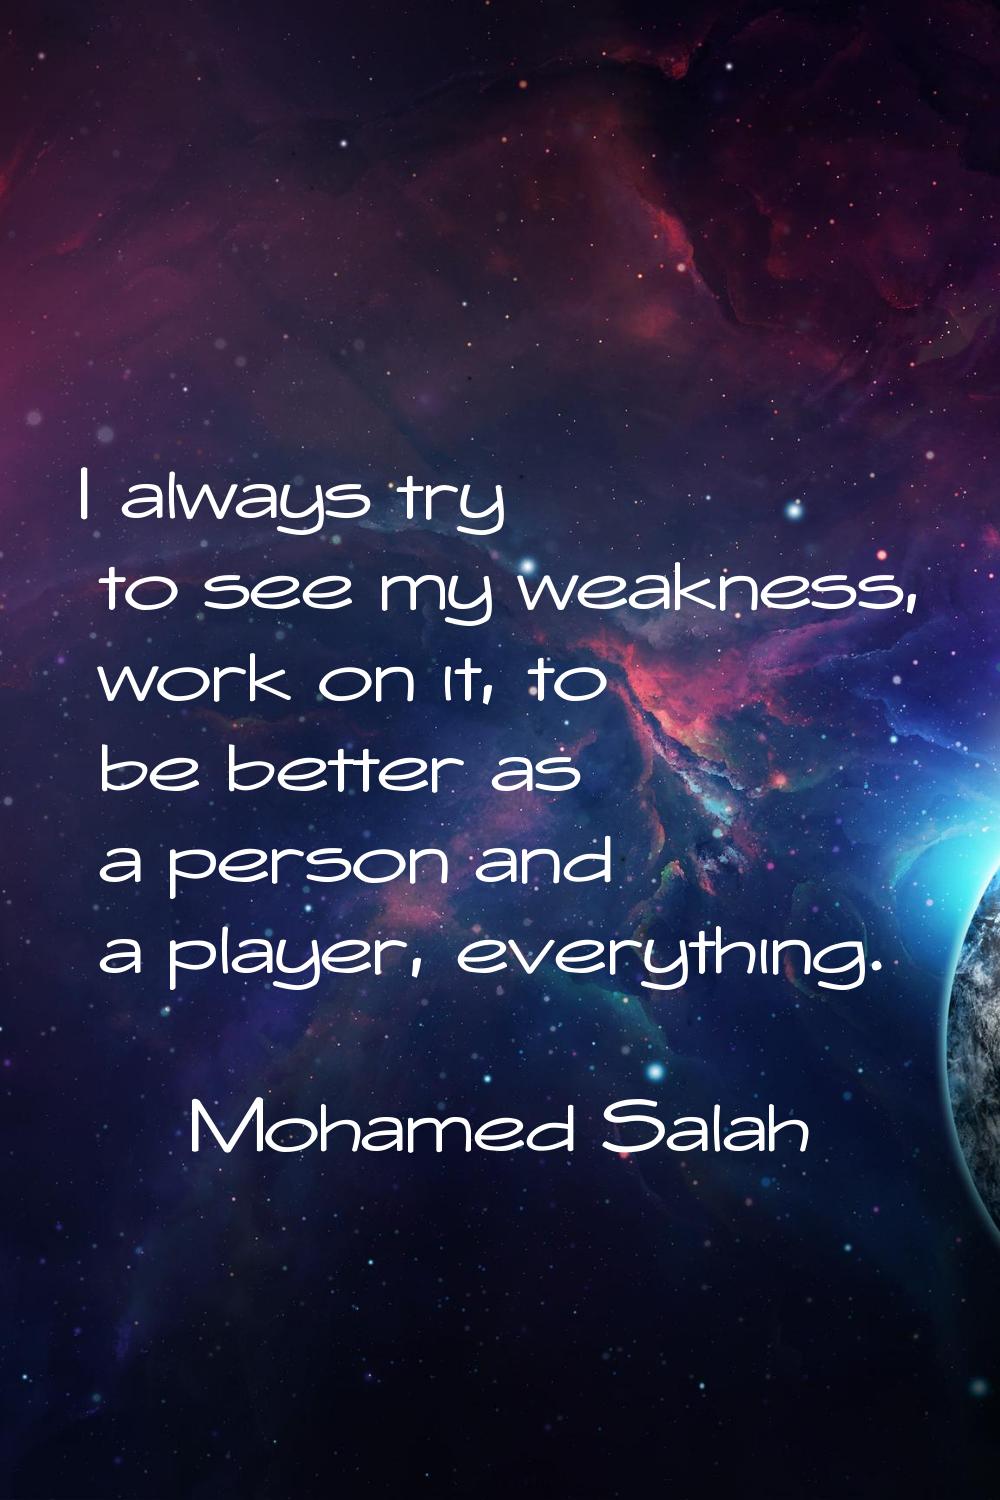 I always try to see my weakness, work on it, to be better as a person and a player, everything.